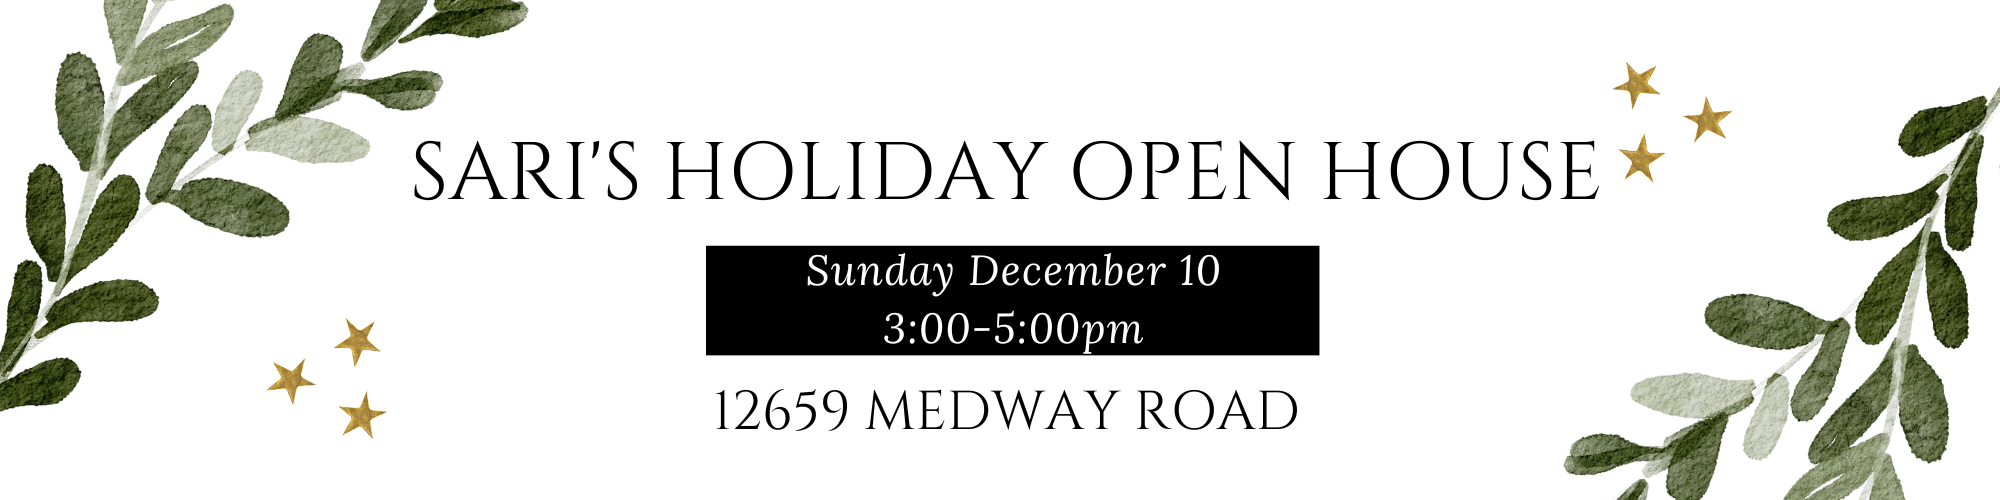 Holiday Open House.png